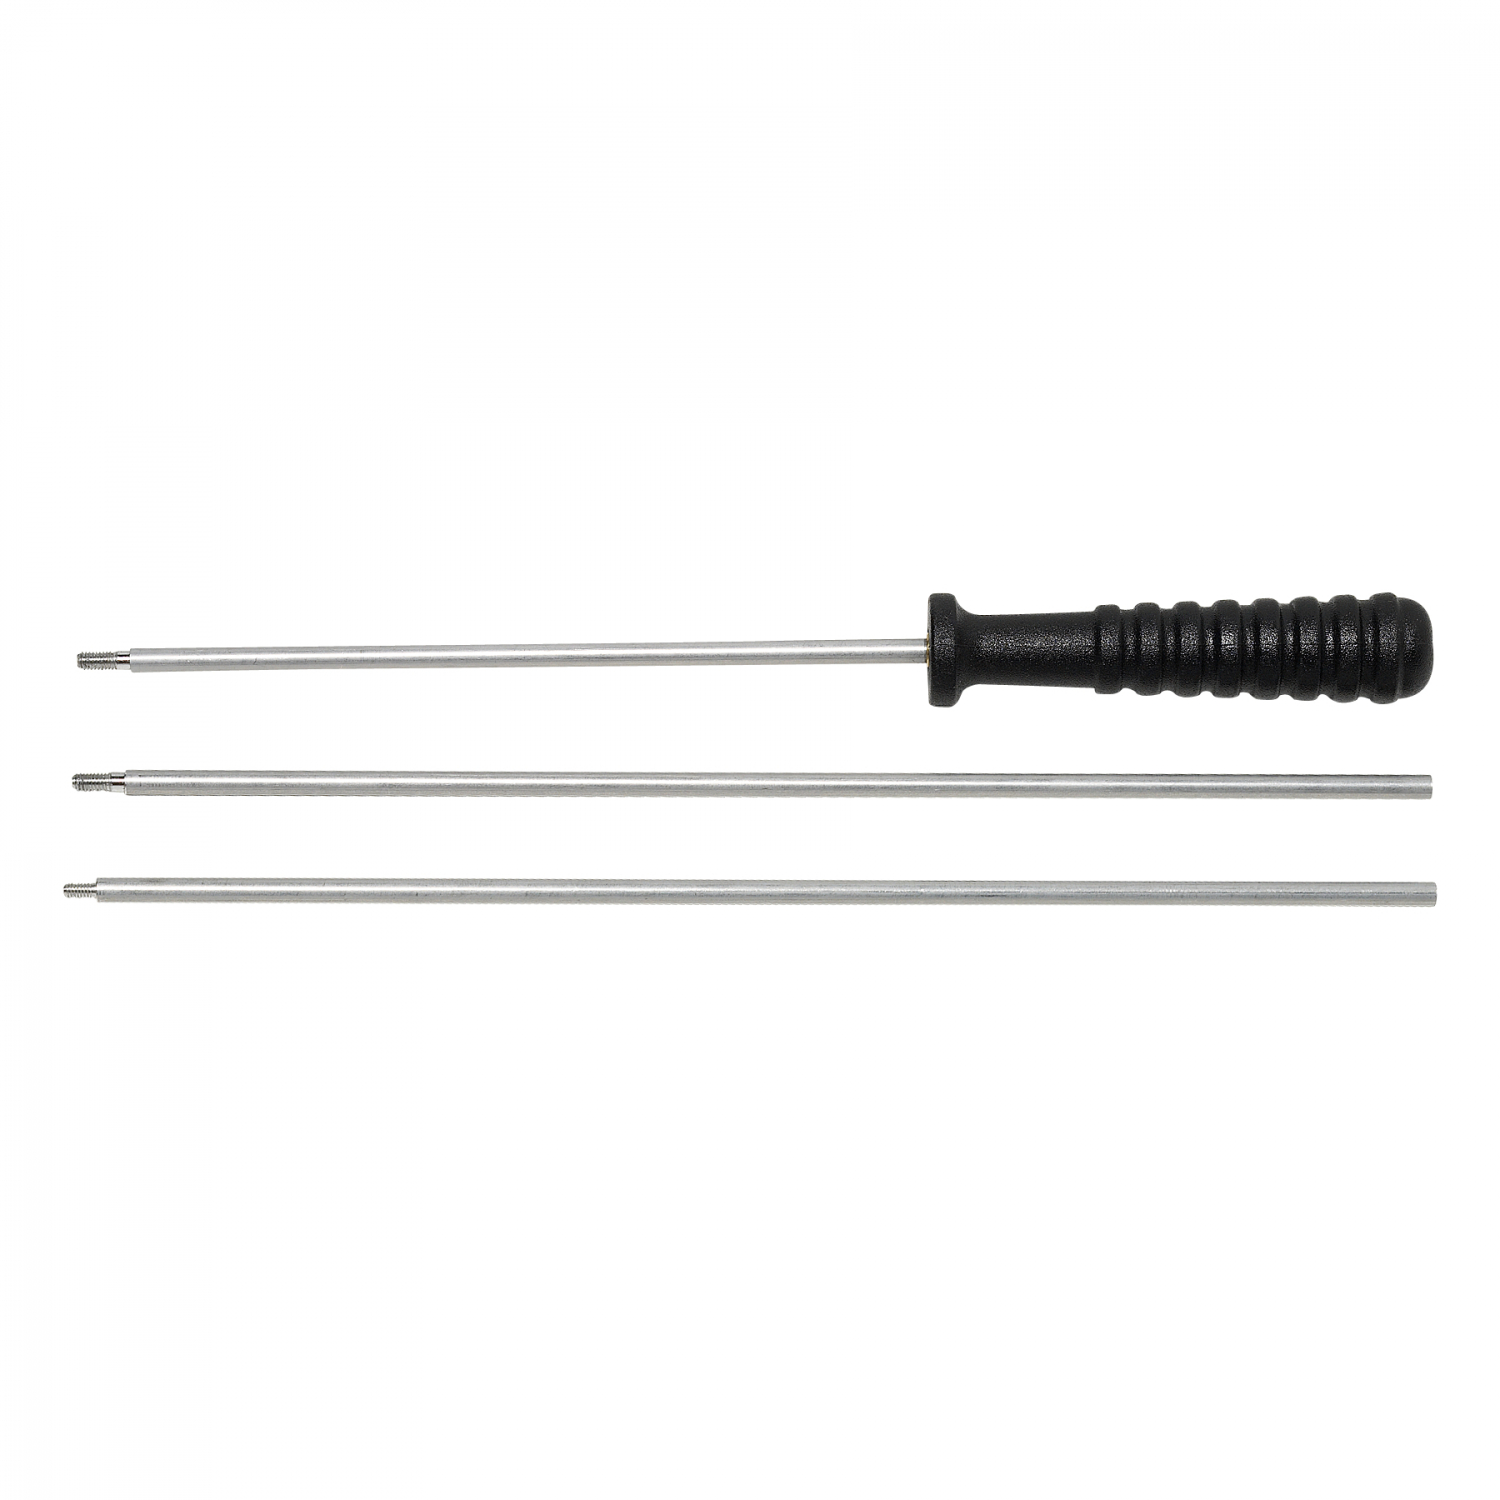 Megaline Rifle Cleaning Rod (Steel) 